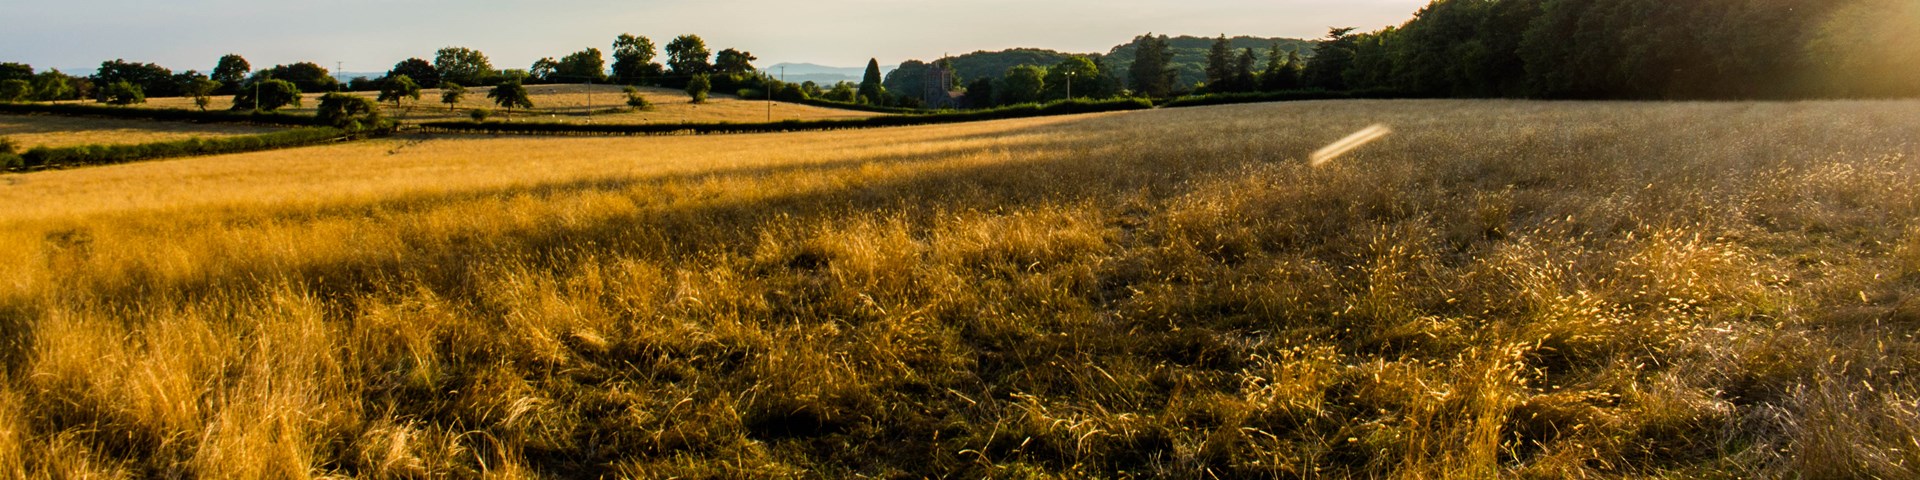 Pitcure of field on a sunny evening 